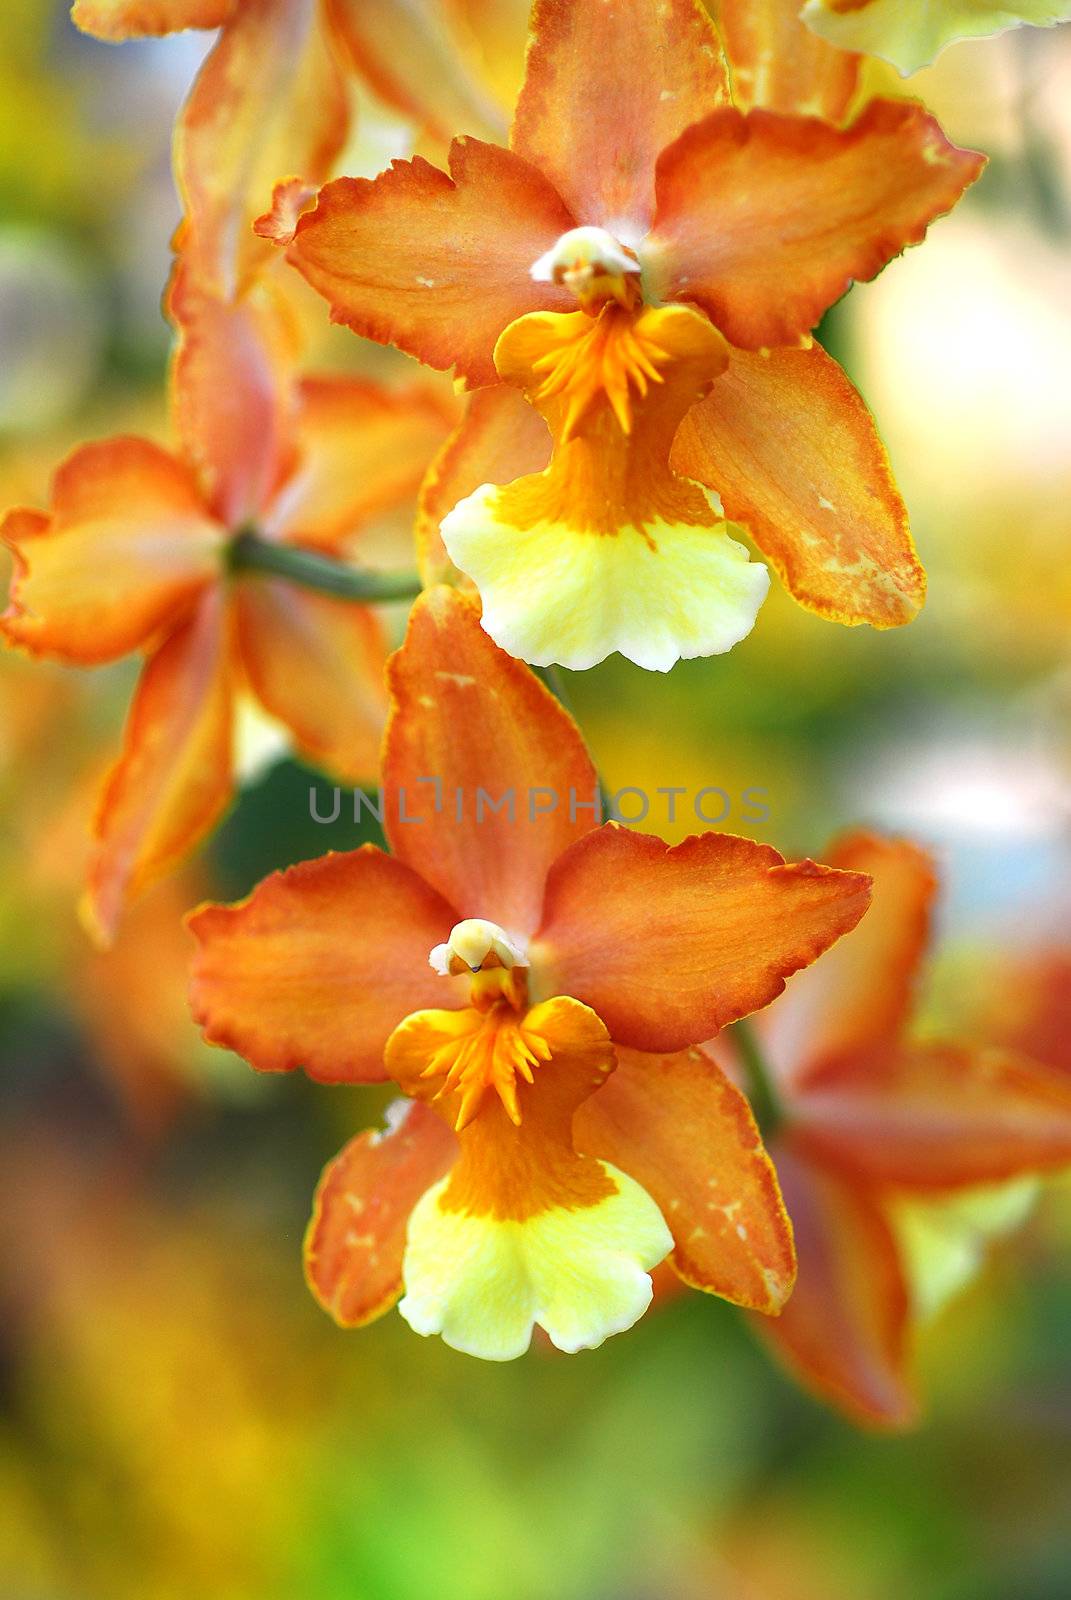 Oncidium Yellow brown Orchid flower in bloom in spring